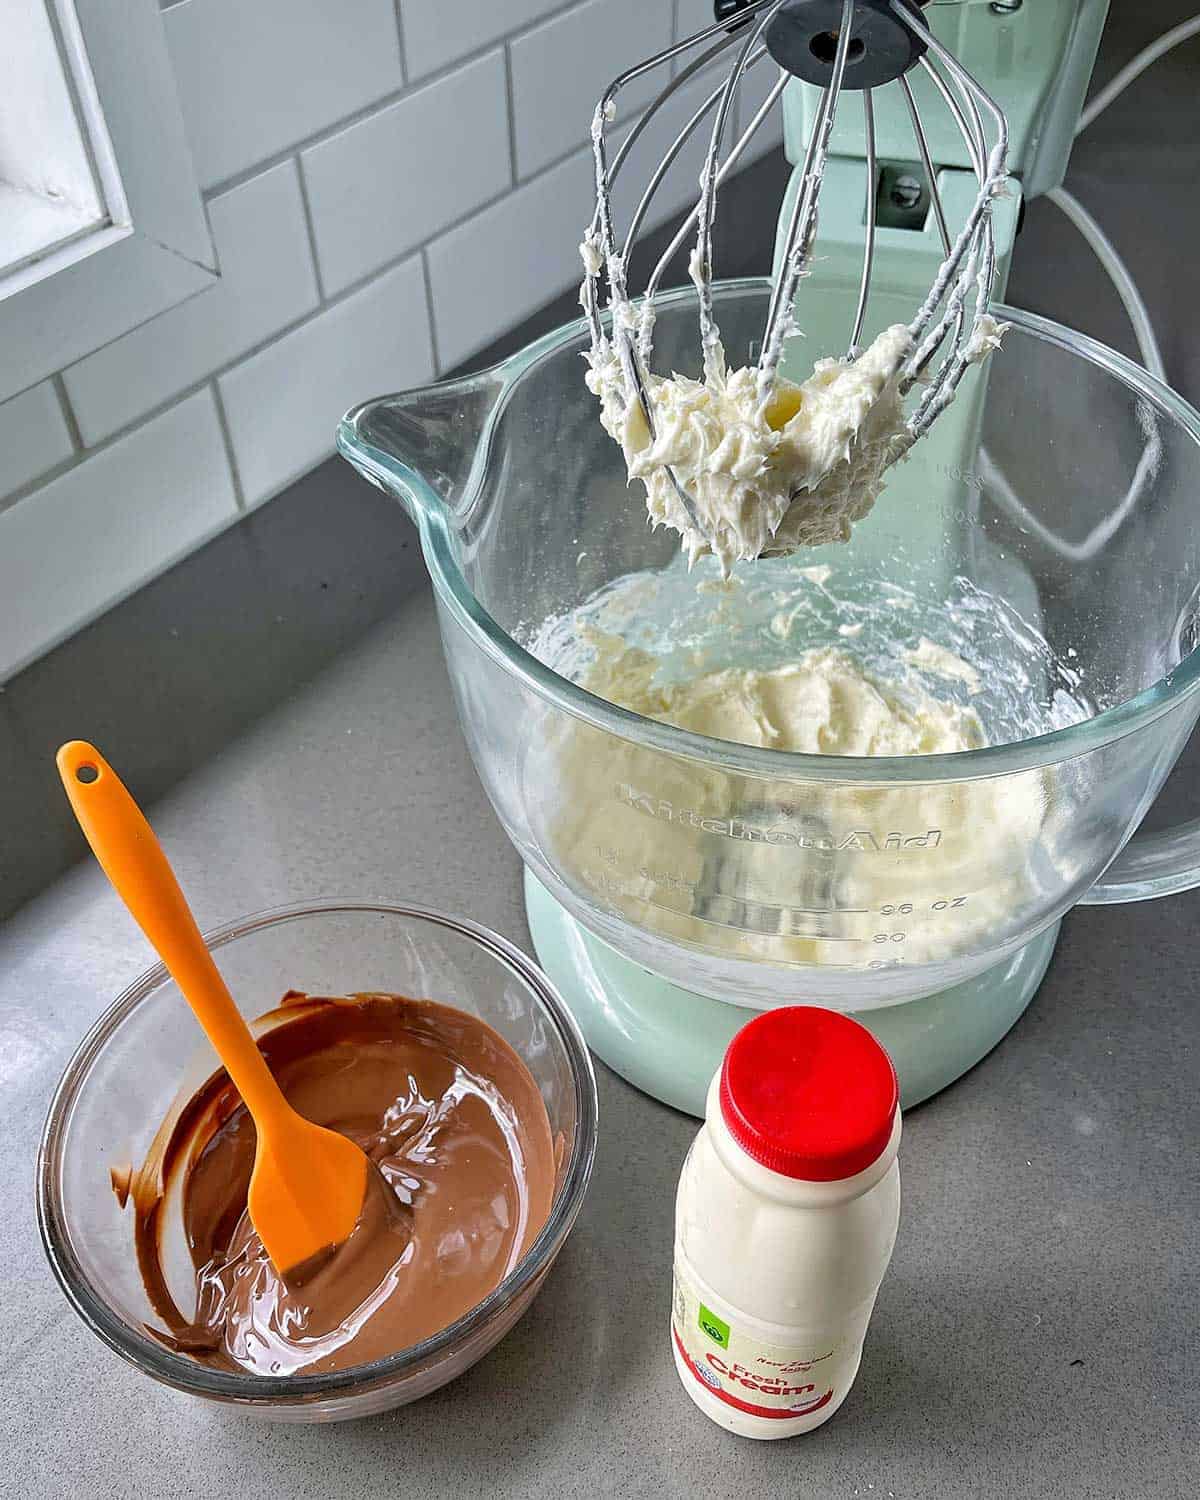 A mixer with whipped cream in it, a bowl of melted chocolate and a bottle of cream sitting on a bench.